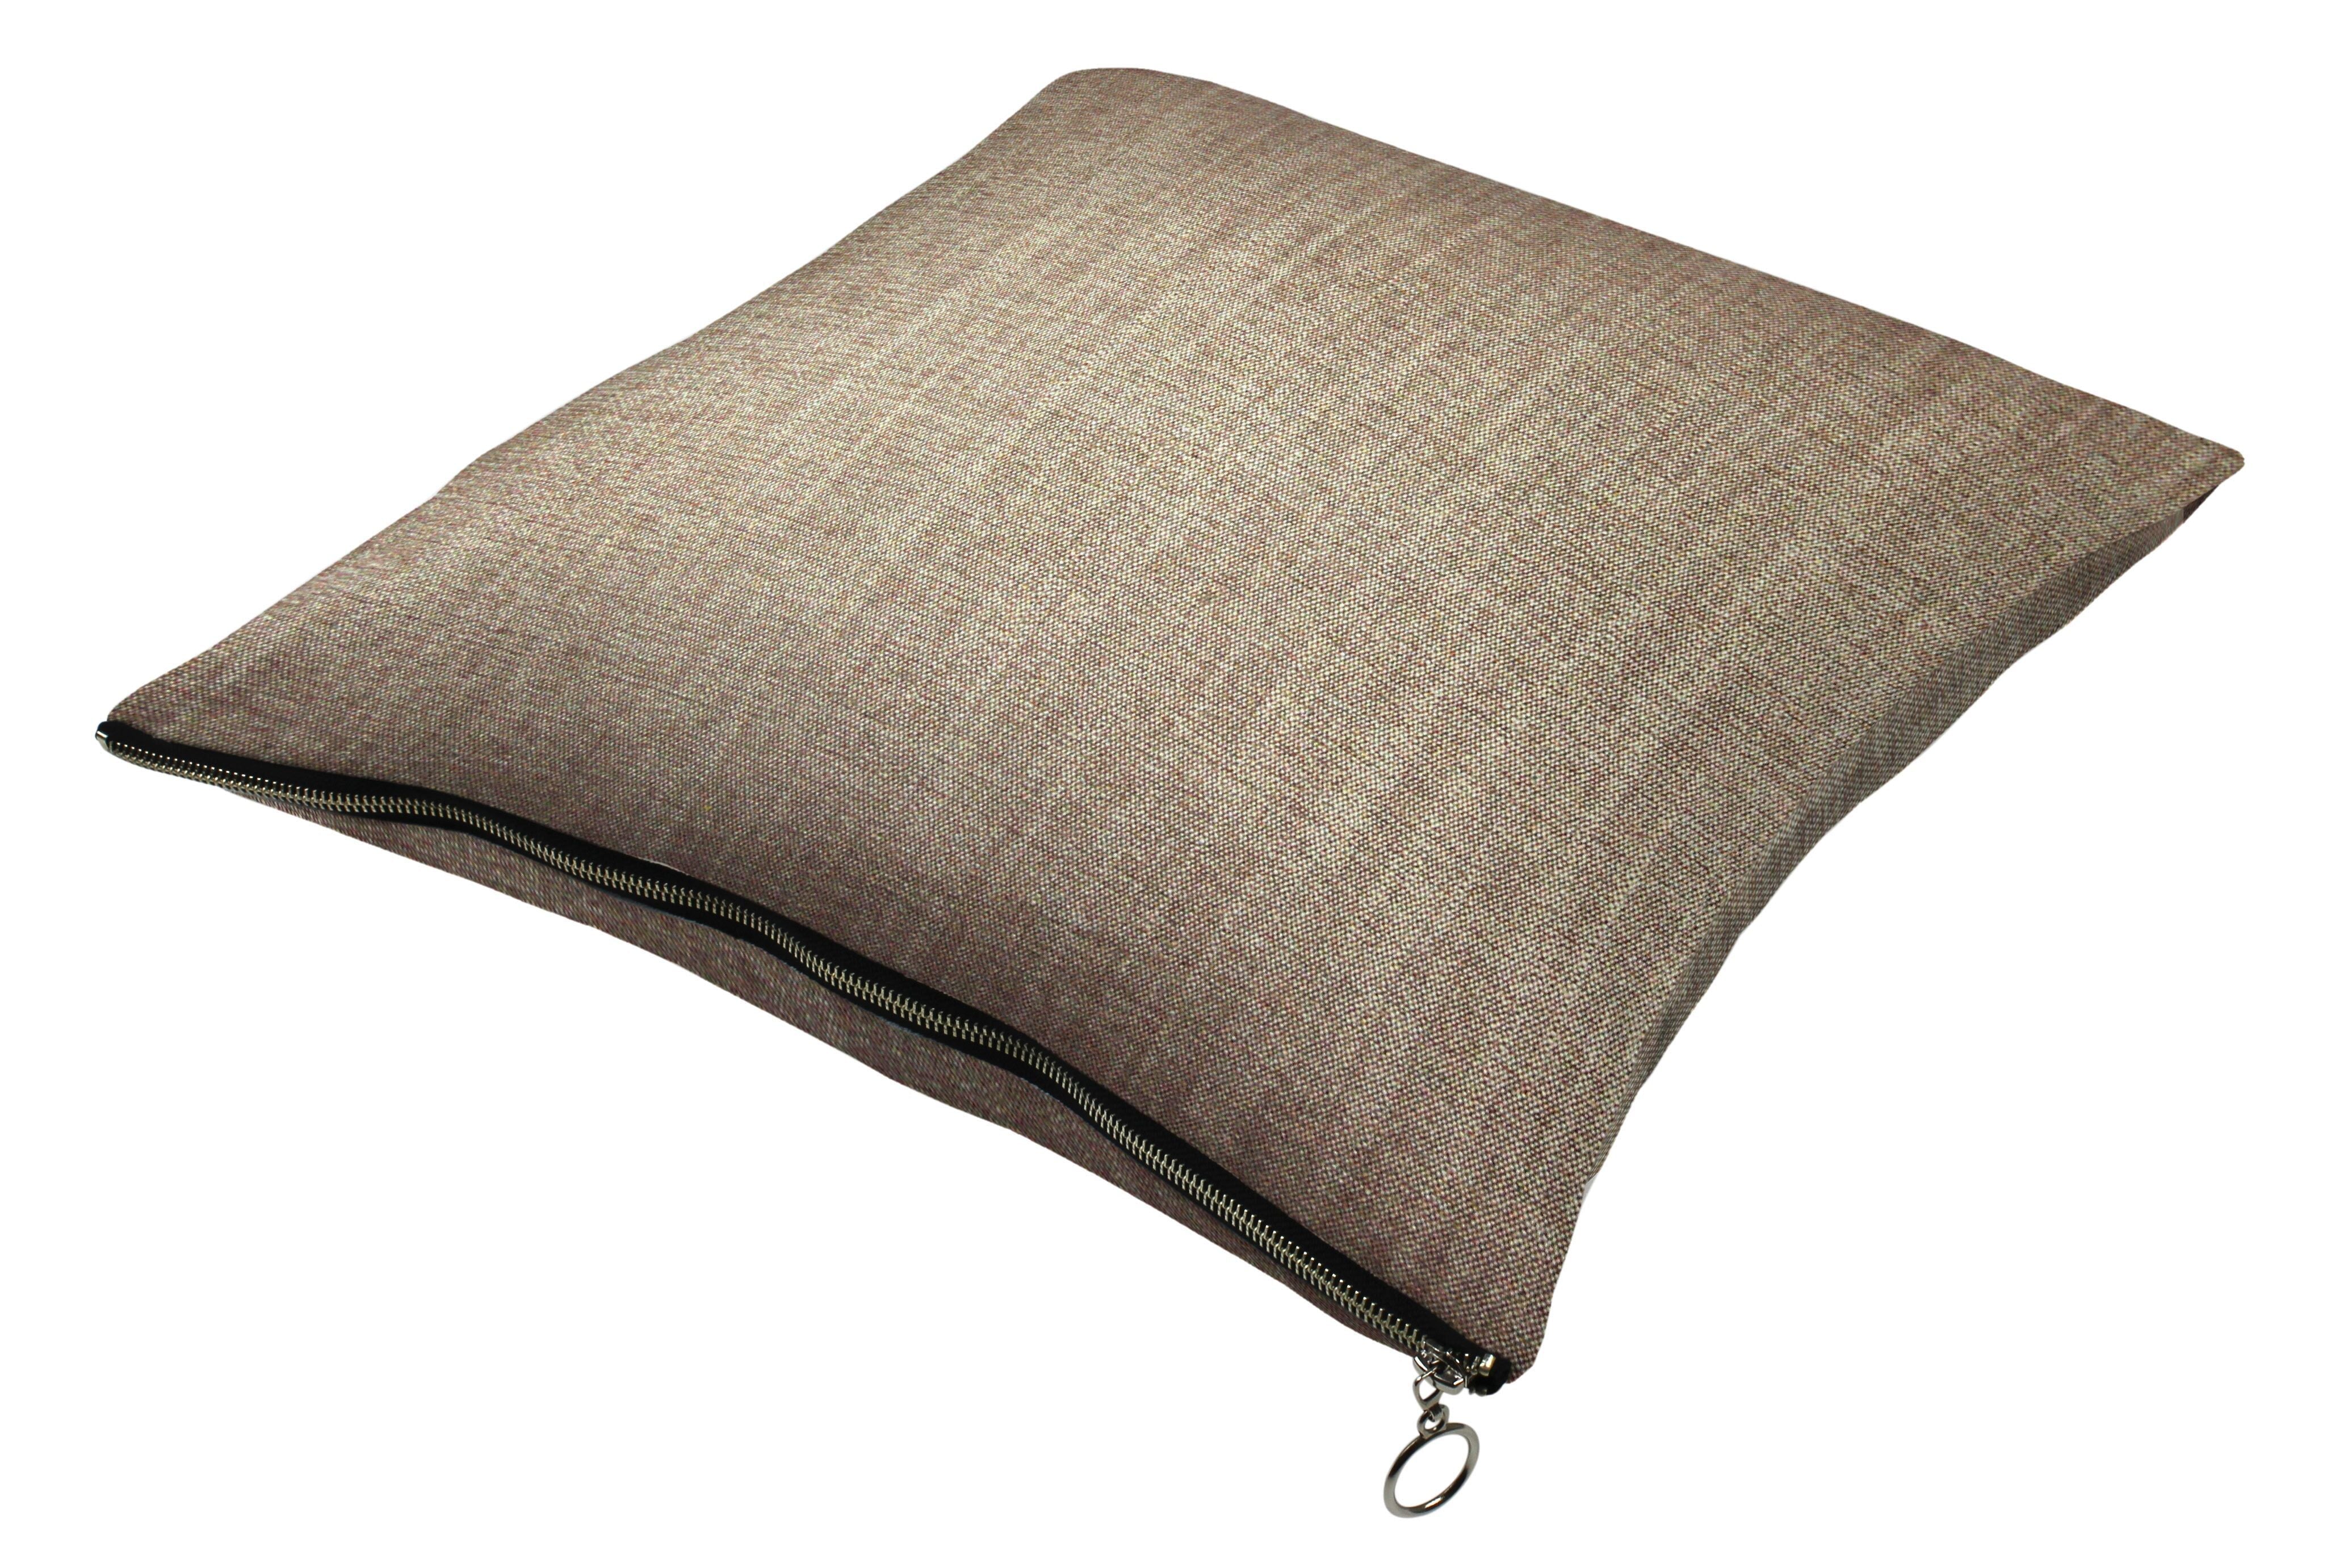 McAlister Textiles Rhumba Zipper Edge Taupe Linen Cushion Cushions and Covers Cover Only 43cm x 43cm 